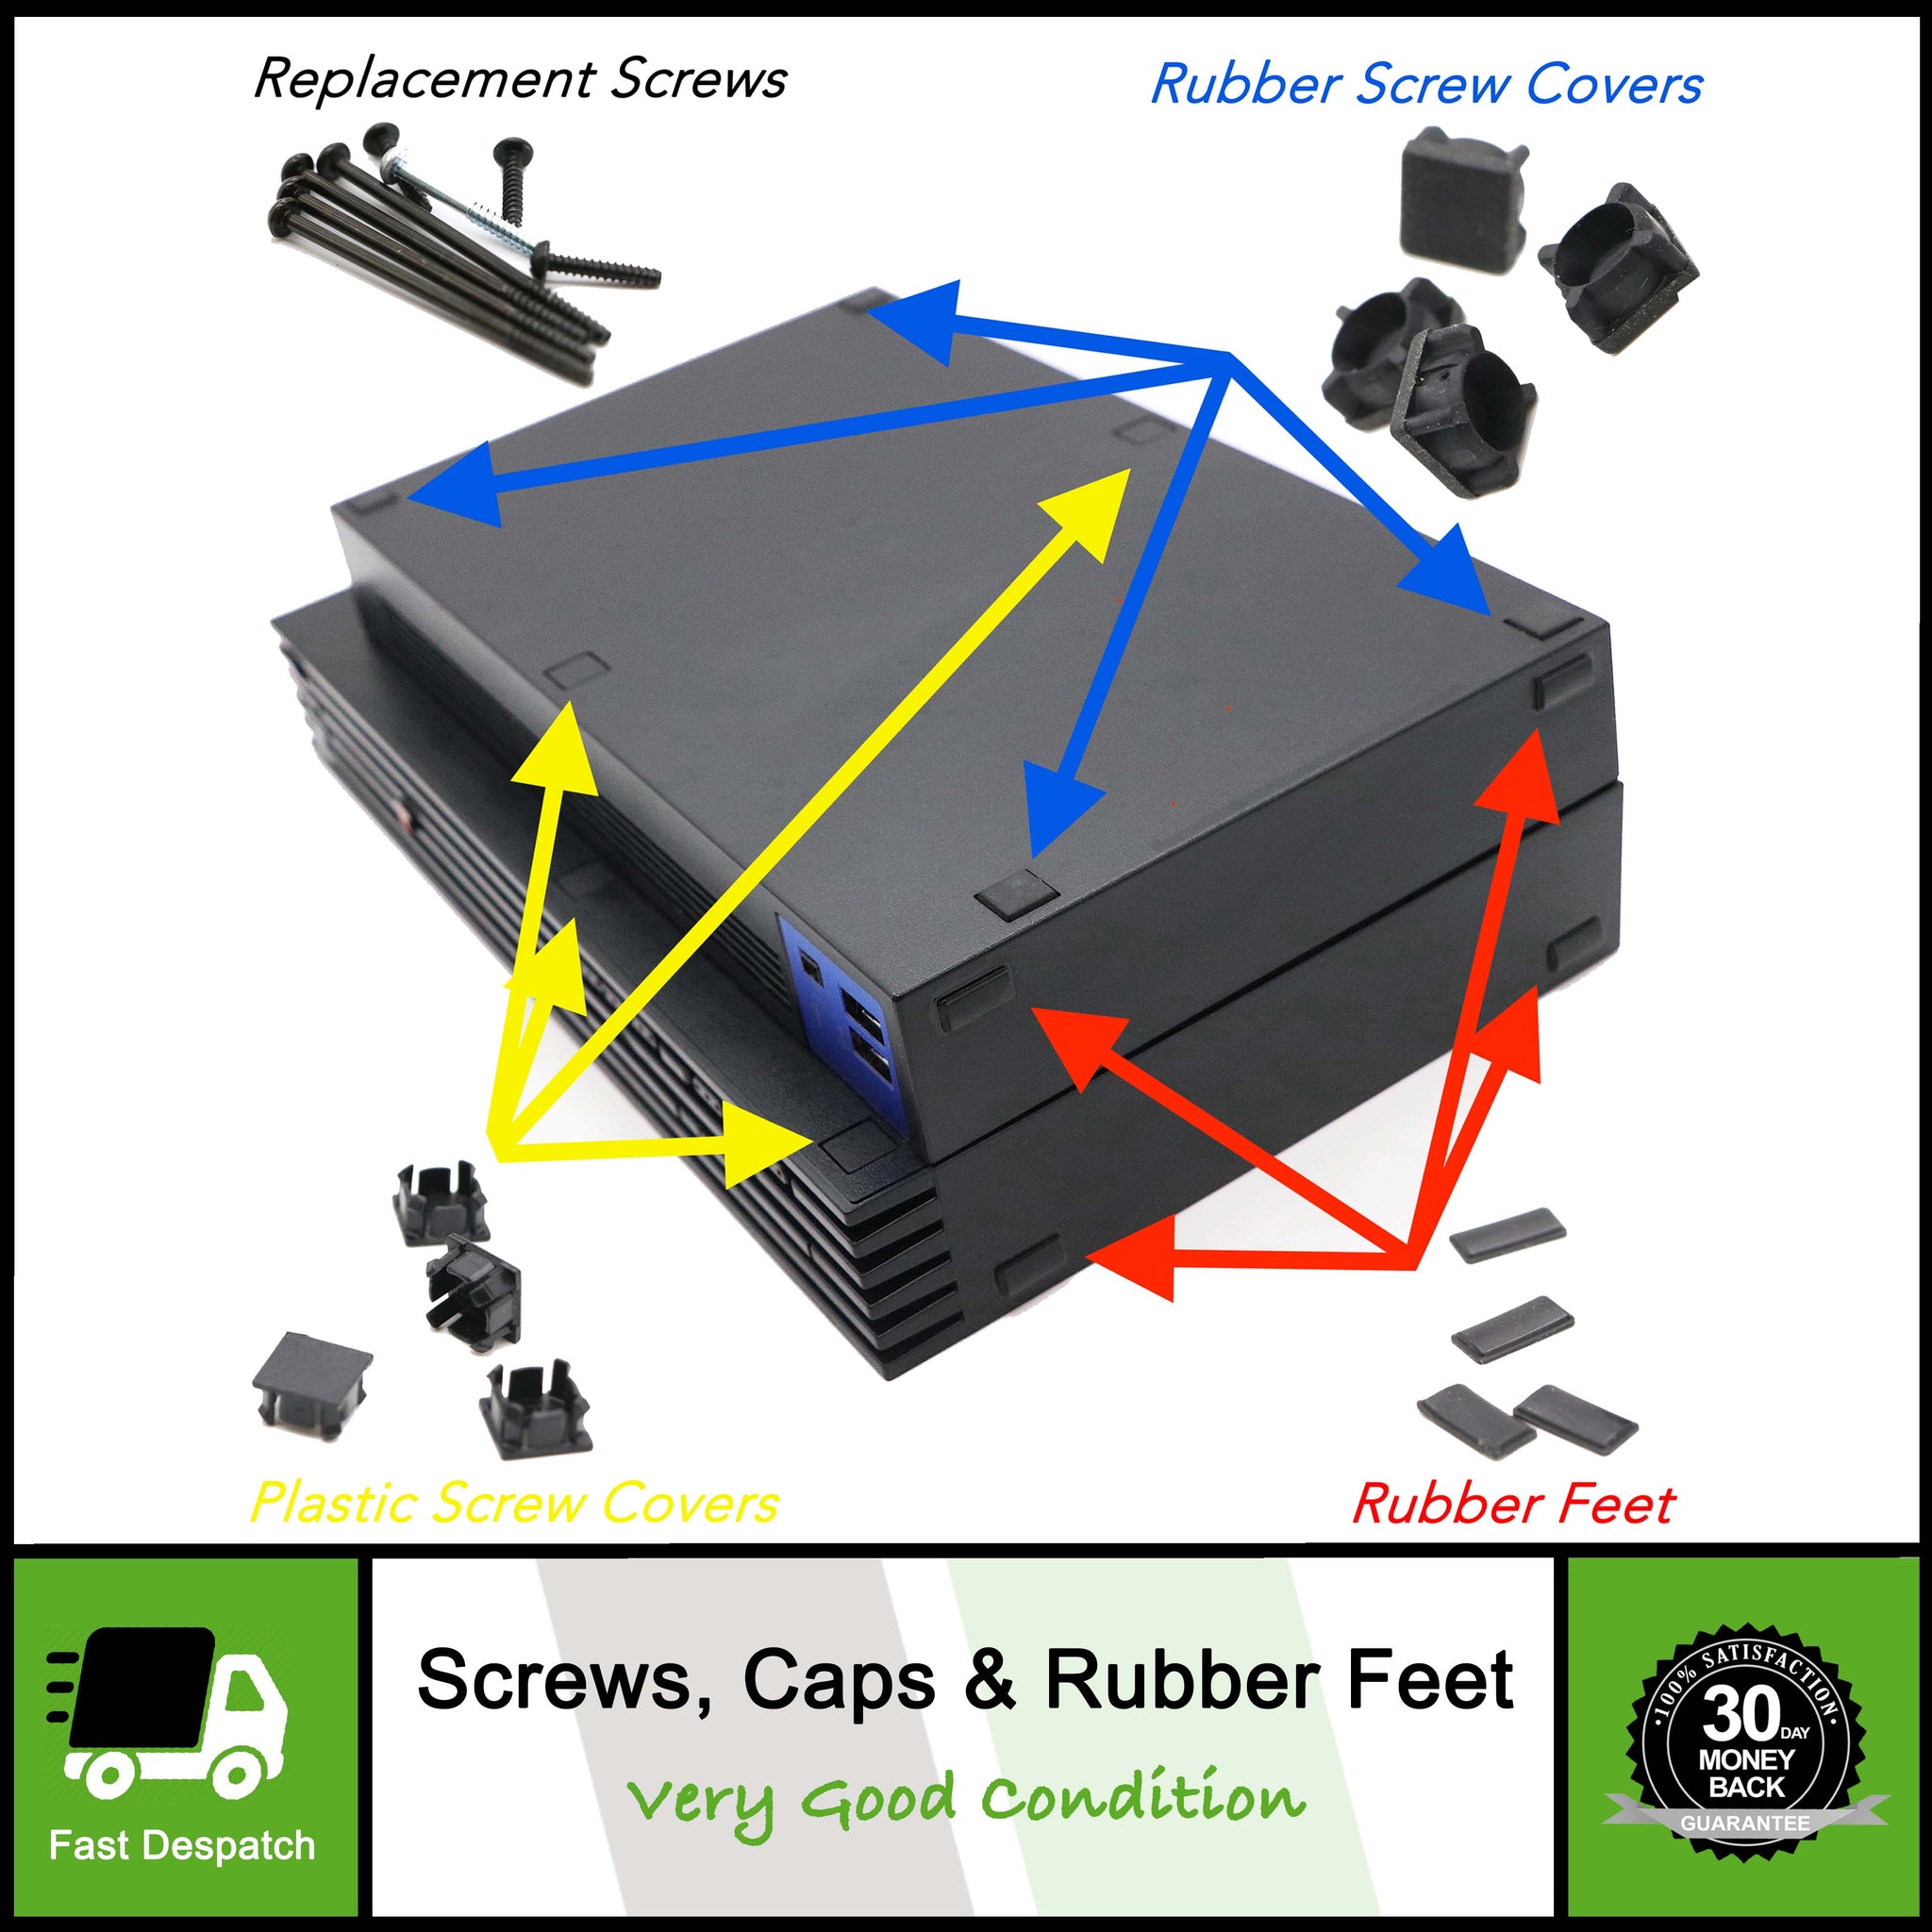 Official Replacement Screws Rubber Feet Covers Caps For Sony PS2/PS3 Consoles